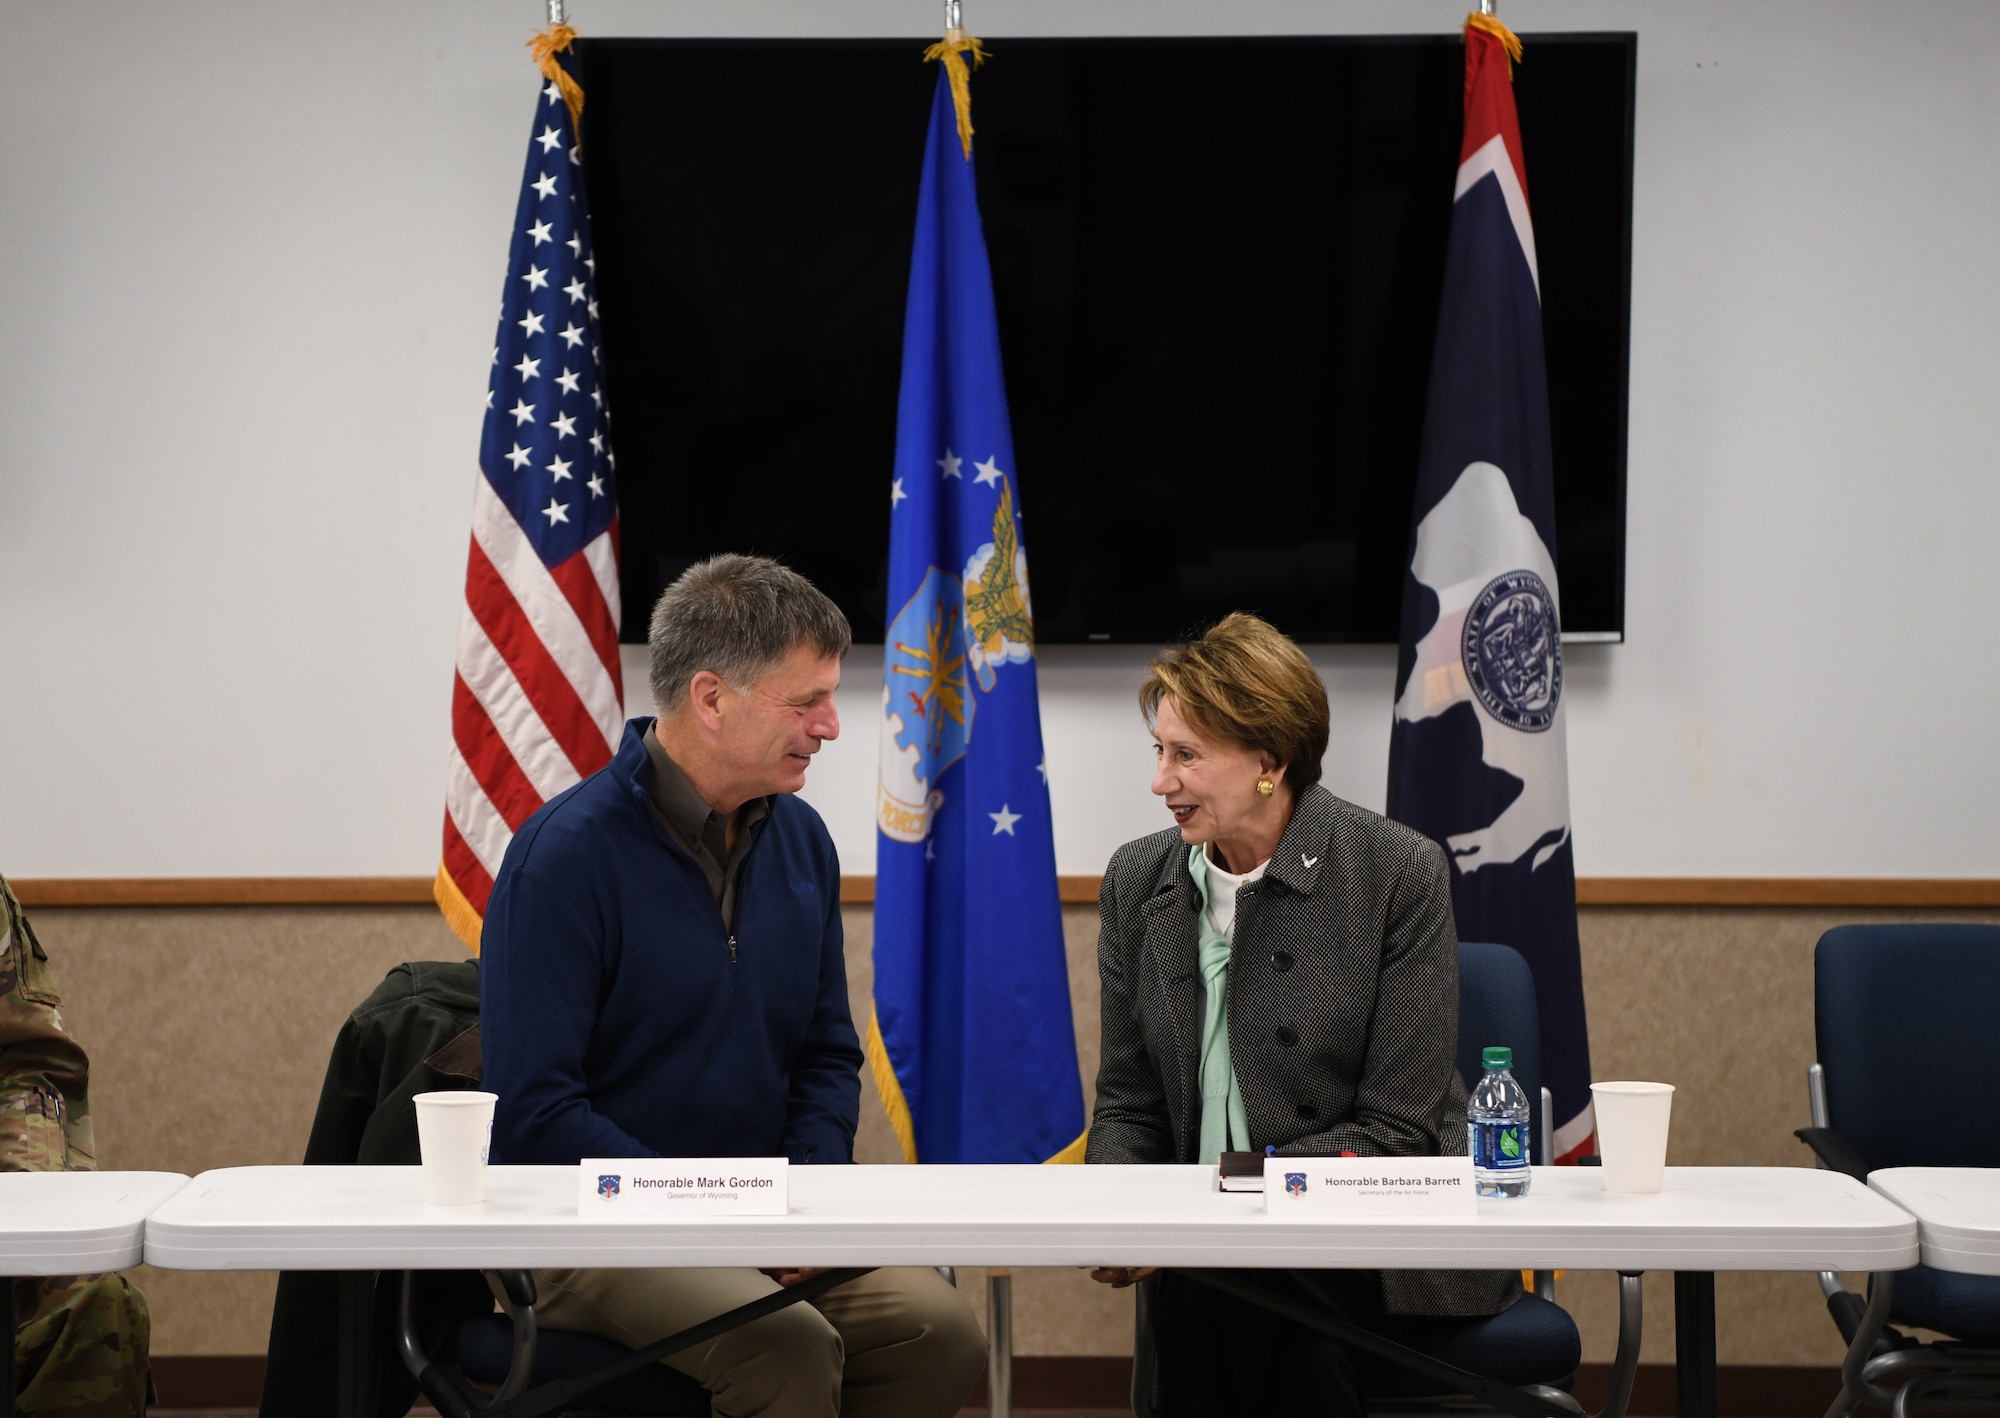 Secretary of the Air Force Barbara Barrett speaks to Wyoming Governor Mark Gordon at a meet-and-greet during her first stop on tour Oct. 27, 2019, at the Wyoming Air National Guard in Cheyenne, Wyo. Barrett shared her thanks to the Wyoming Governor, in appreciation towards the leadership and support shown to the military.